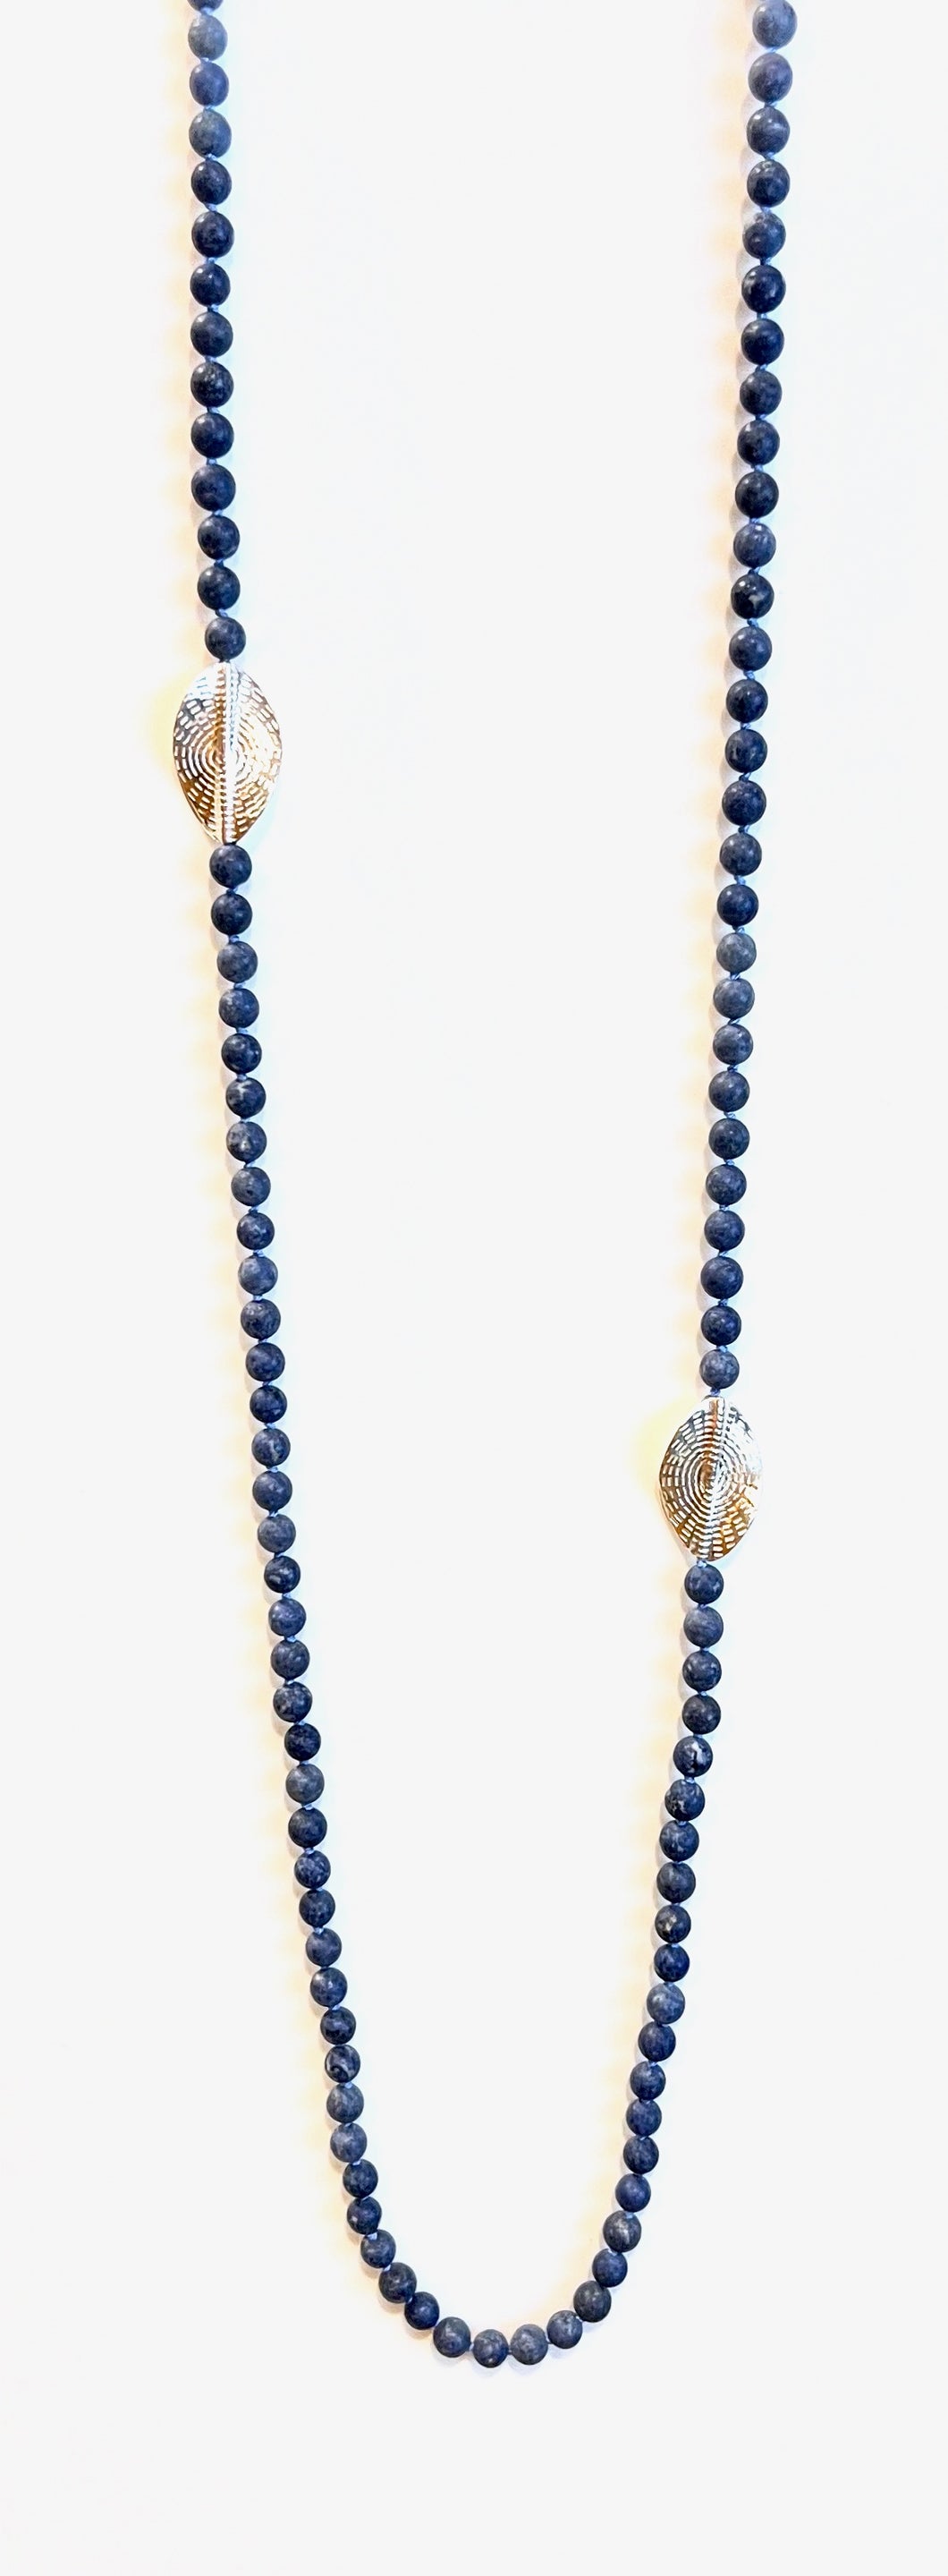 Australian Handmade Blue Necklace with Matt Dumortierite and Sterling Silver